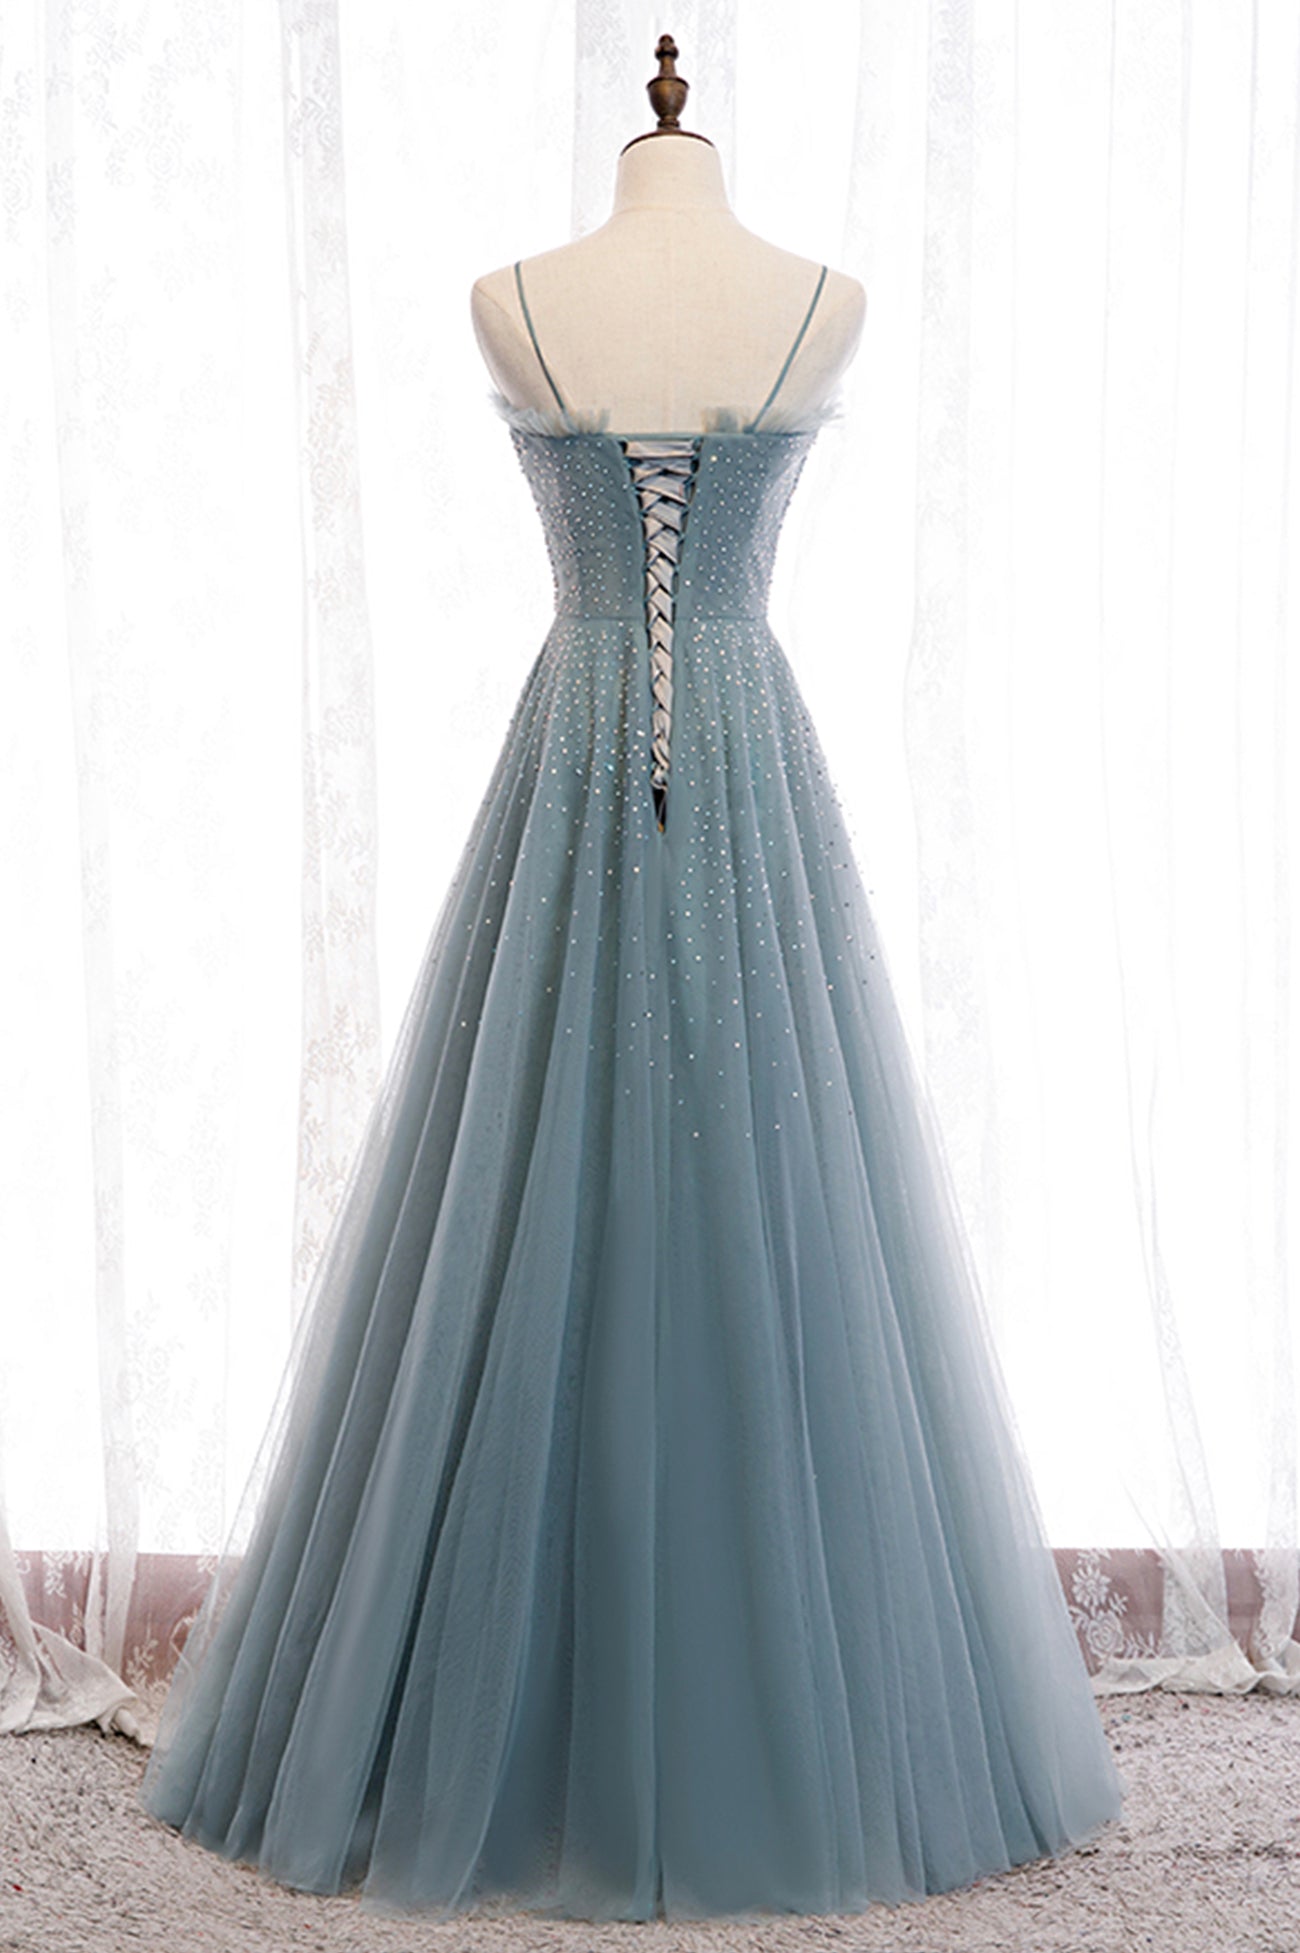 Prom Dress For Short Girl, A-Line Spaghetti Straps Tulle Beaded Long Prom Dress, Cute Evening Party Dress